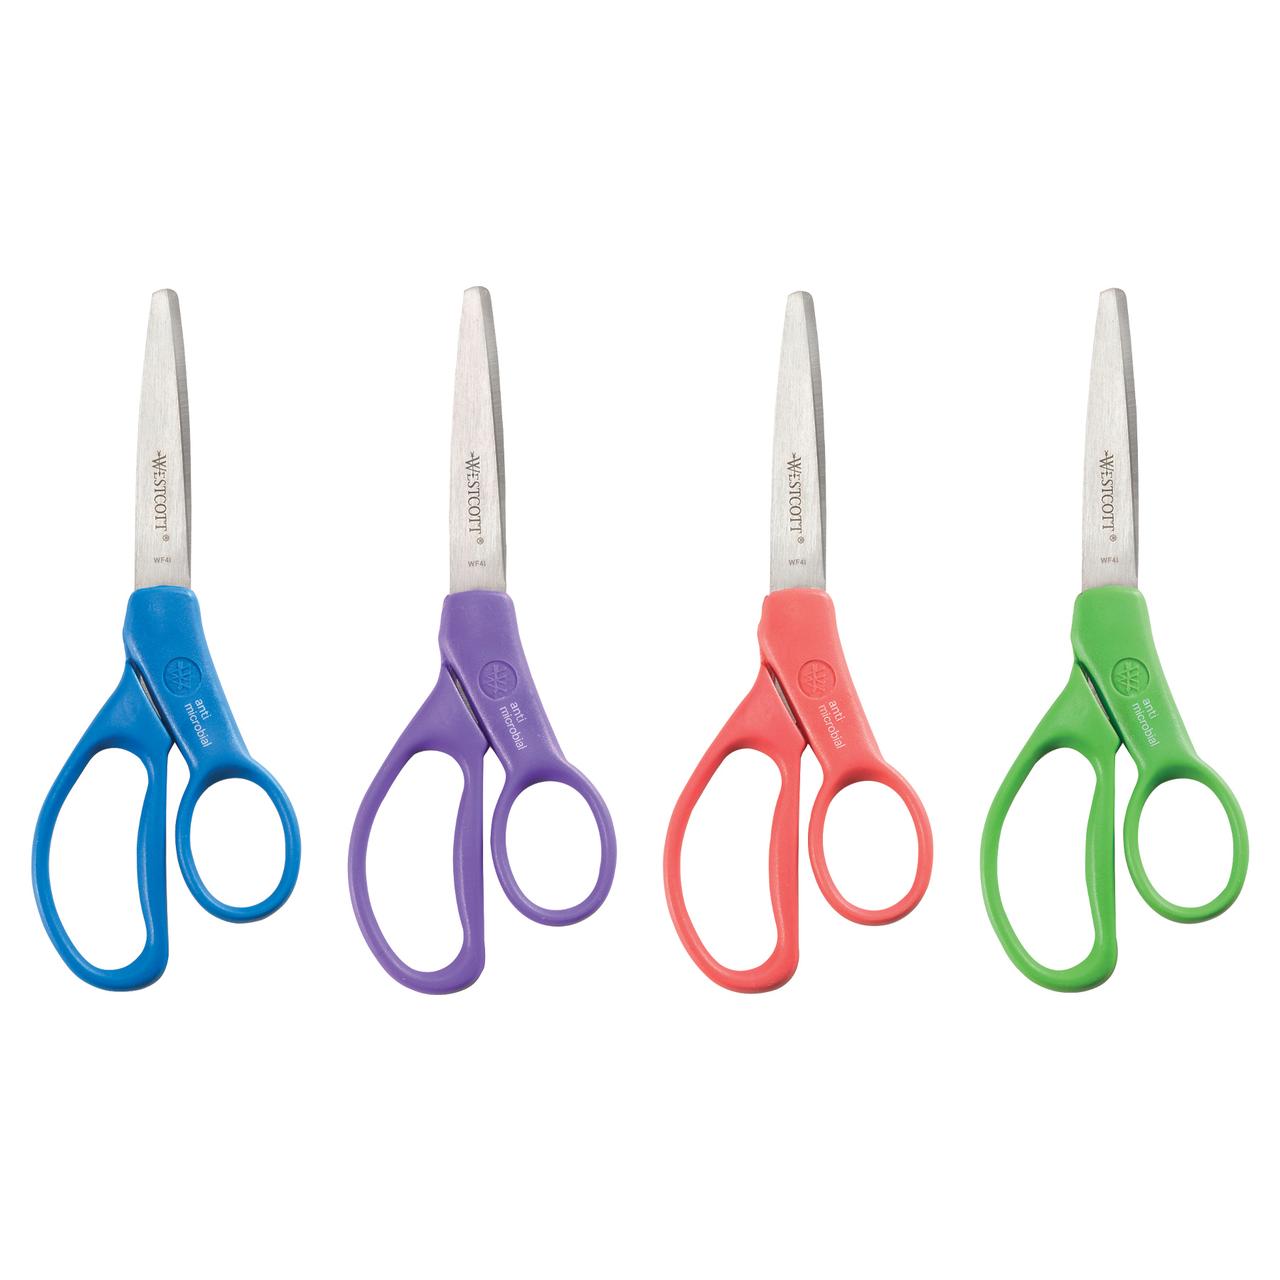 Westcott 7" Student Scissors with Anti-Microbial Protection, Multi-Color, 1 Count - image 4 of 8